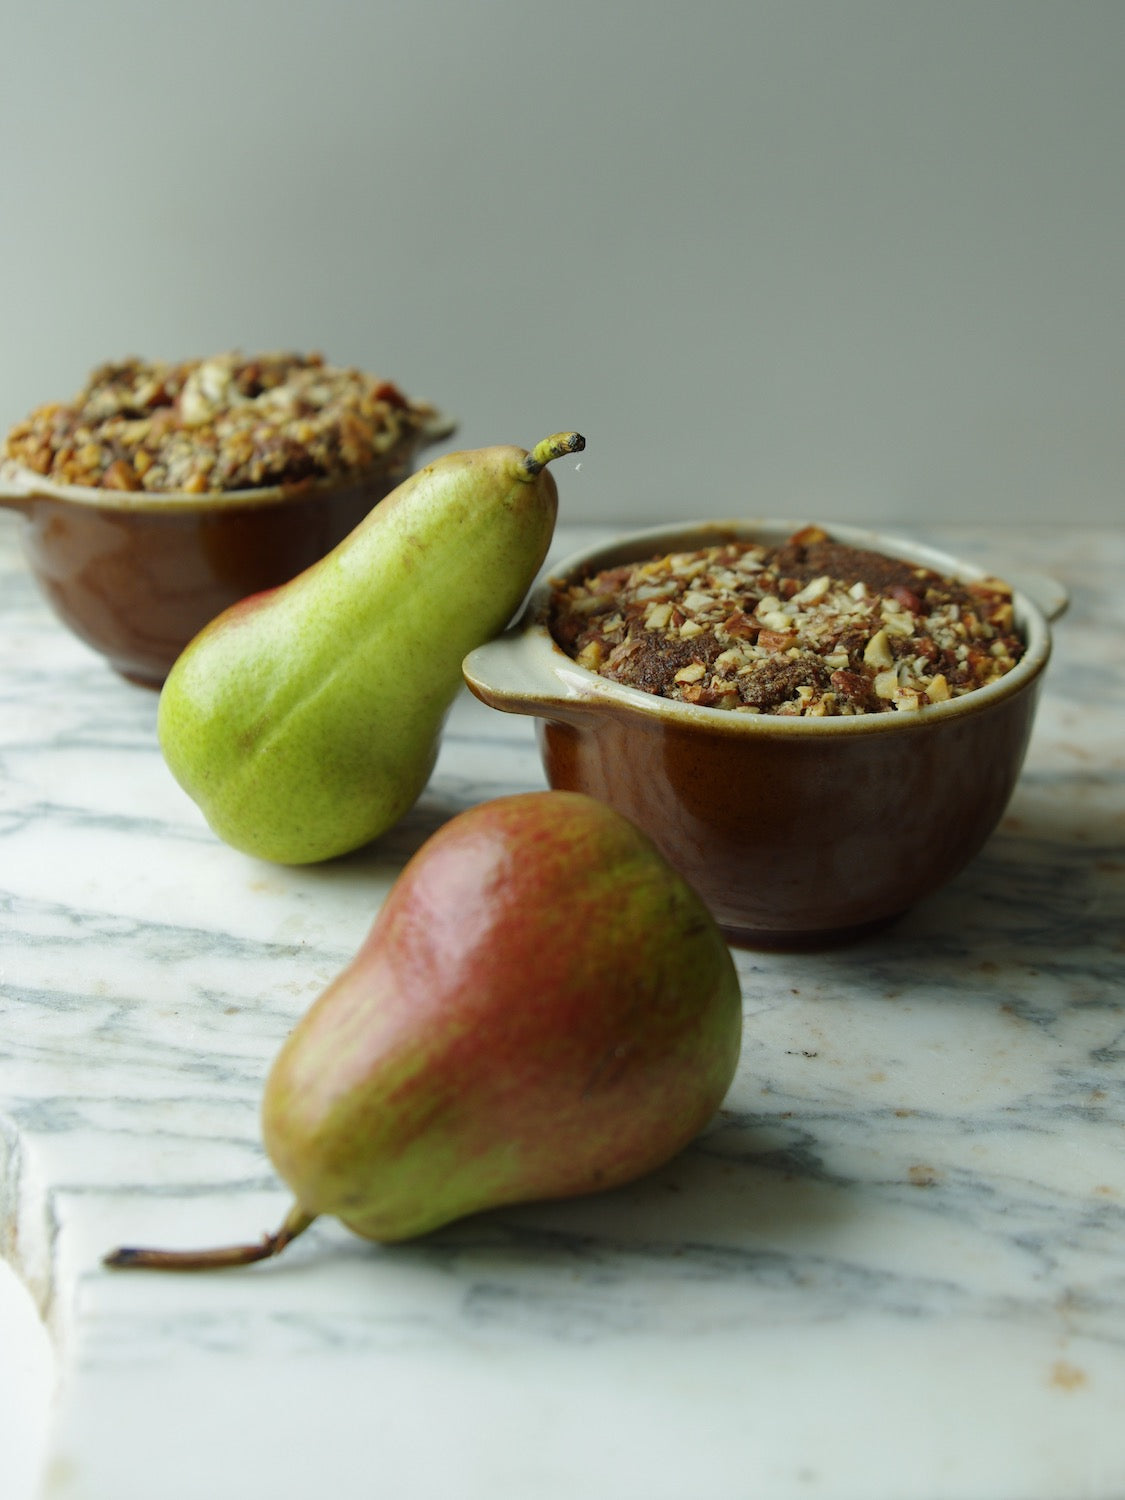 Two brown handled bowls holding baked nut bread next to two pears on a marble counter.